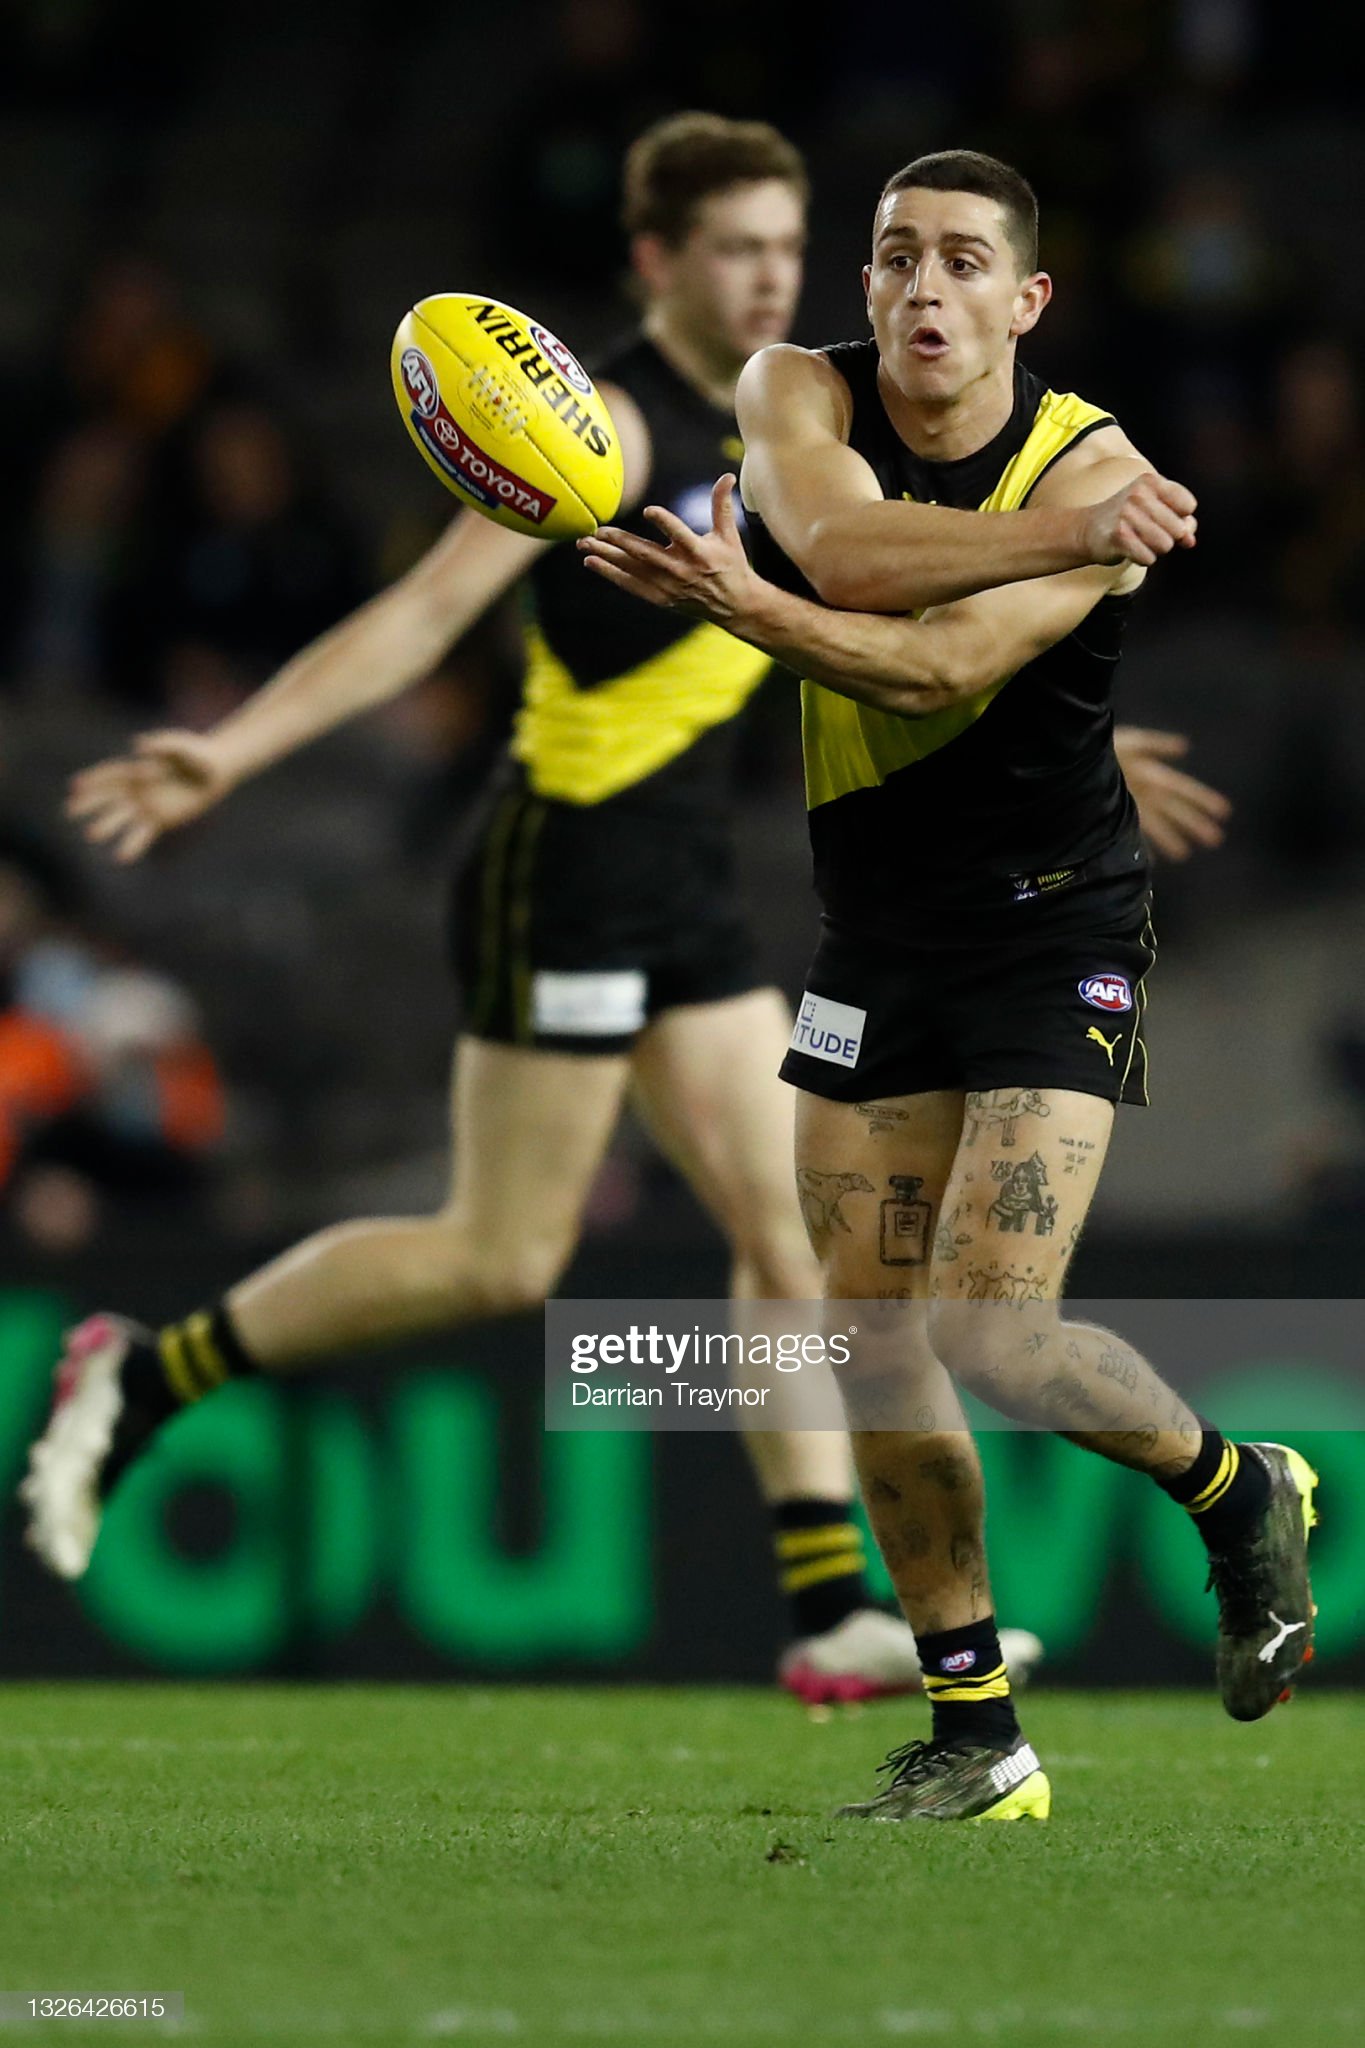 jason-castagna-of-the-tigers-handballs-during-the-round-16-afl-match-picture-id1326426615